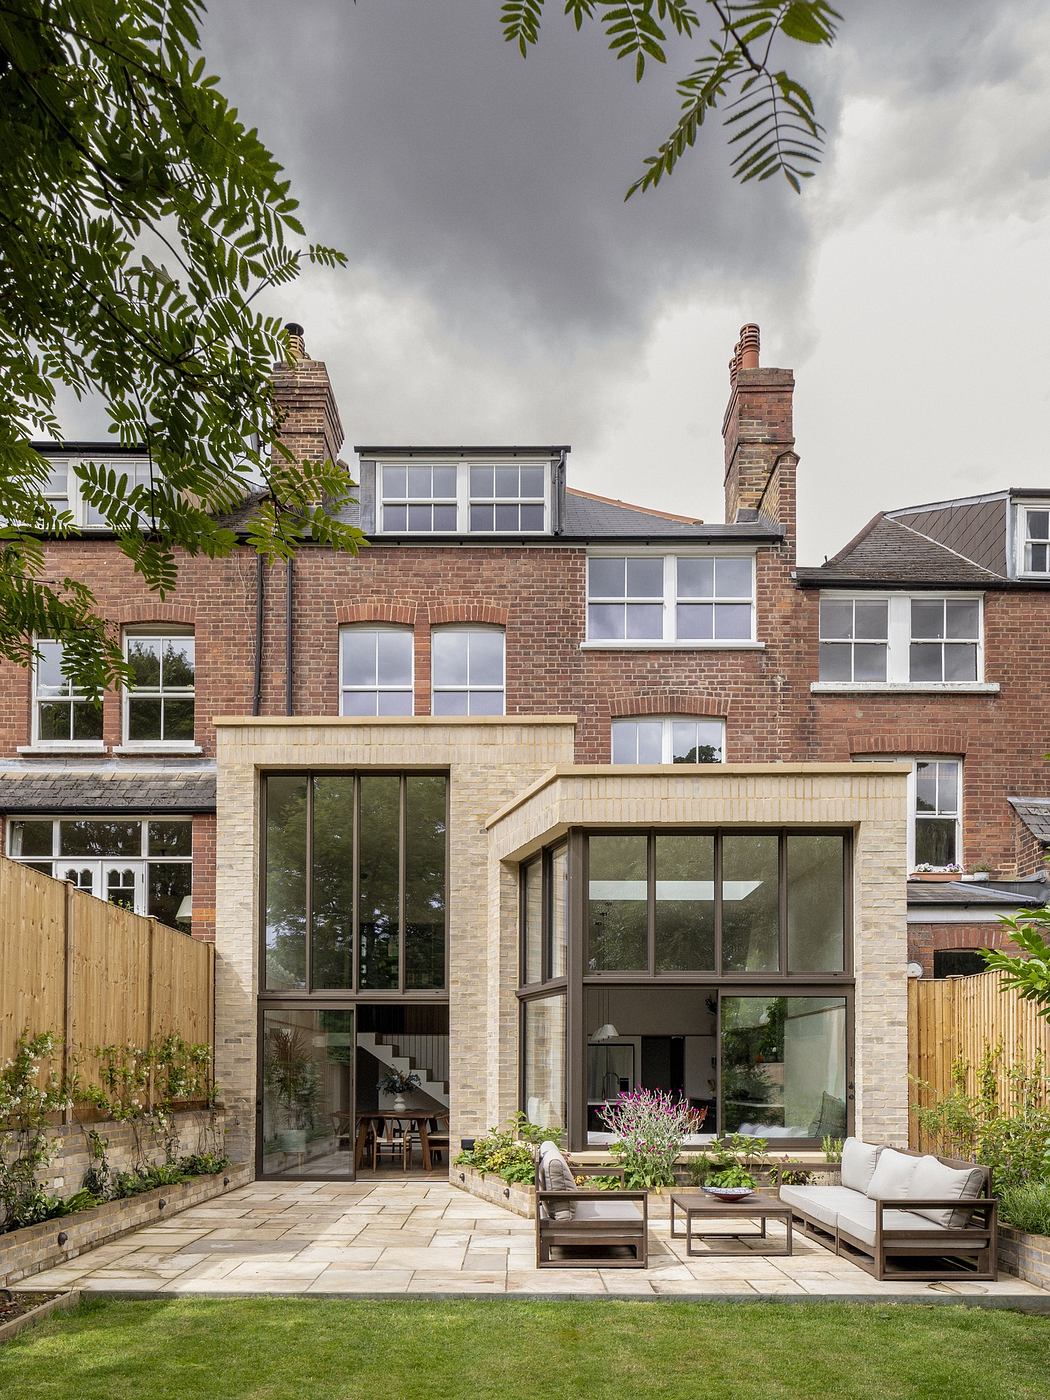 Modern two-story home extension with glass facade and patio furniture.